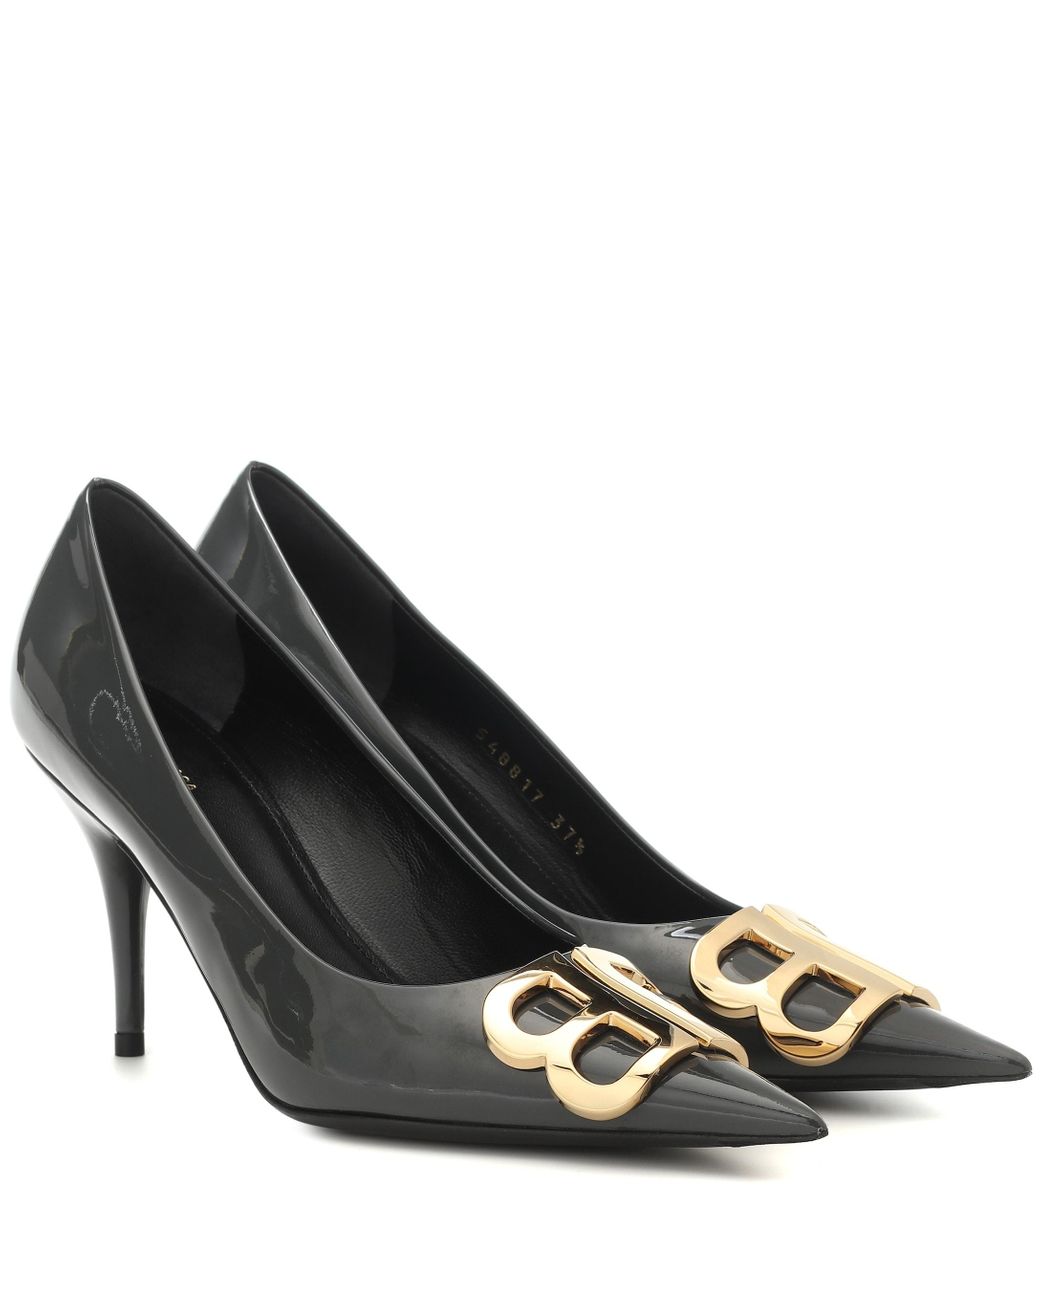 Balenciaga Bb Patent Leather Pumps in Black | Lyst